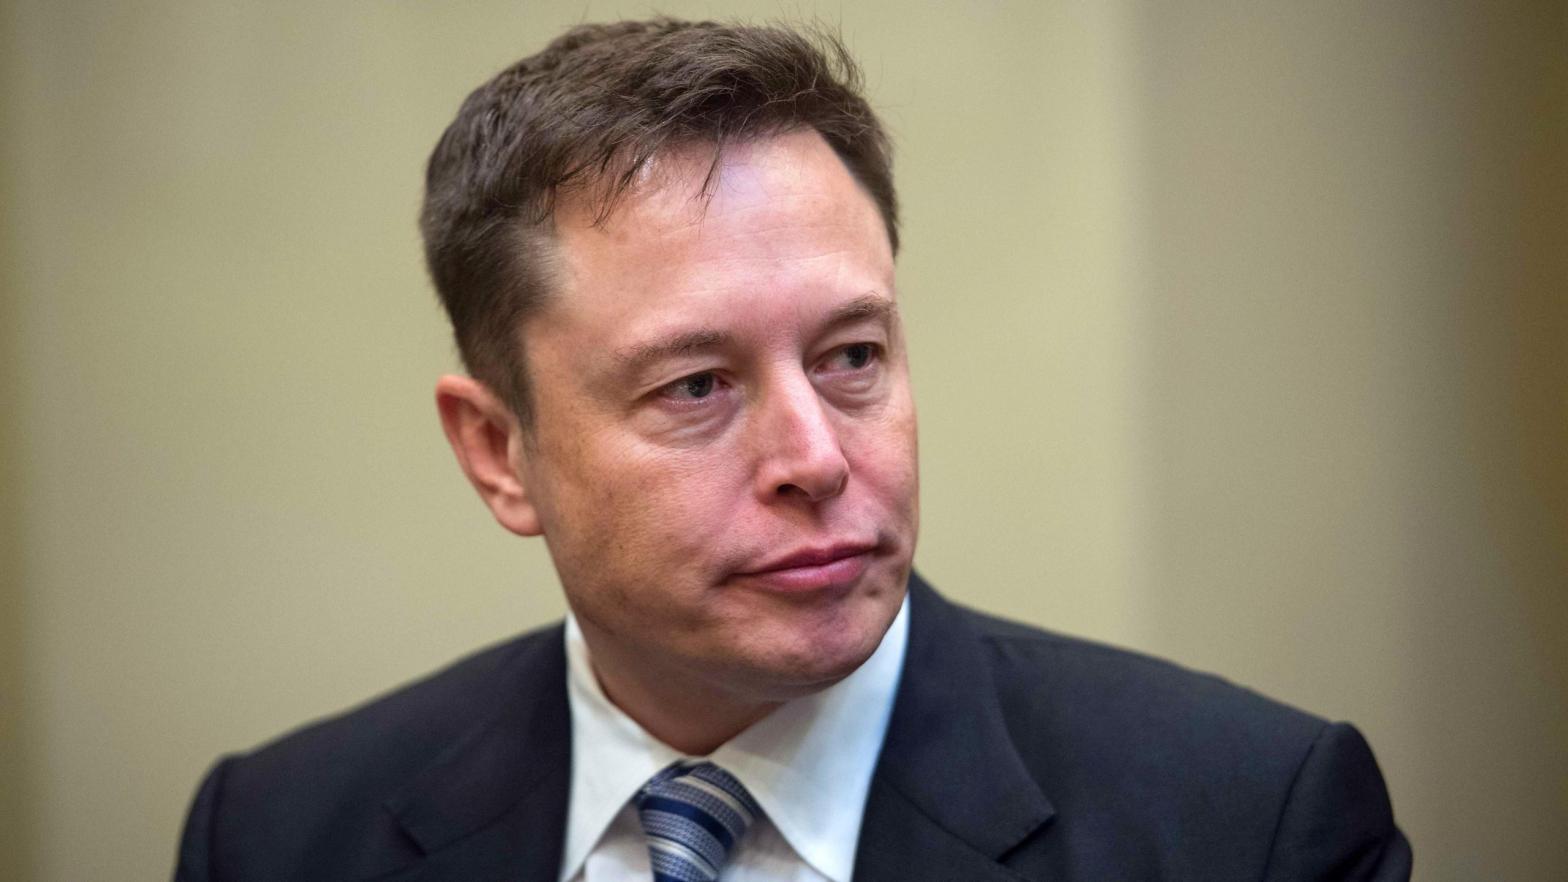 File photo of Elon Musk at a meeting with former President Donald Trump in the Roosevelt Room at the White House in Washington, D.C. on January 23, 2017. (Photo: Nicholas Kamm/AFP, Getty Images)